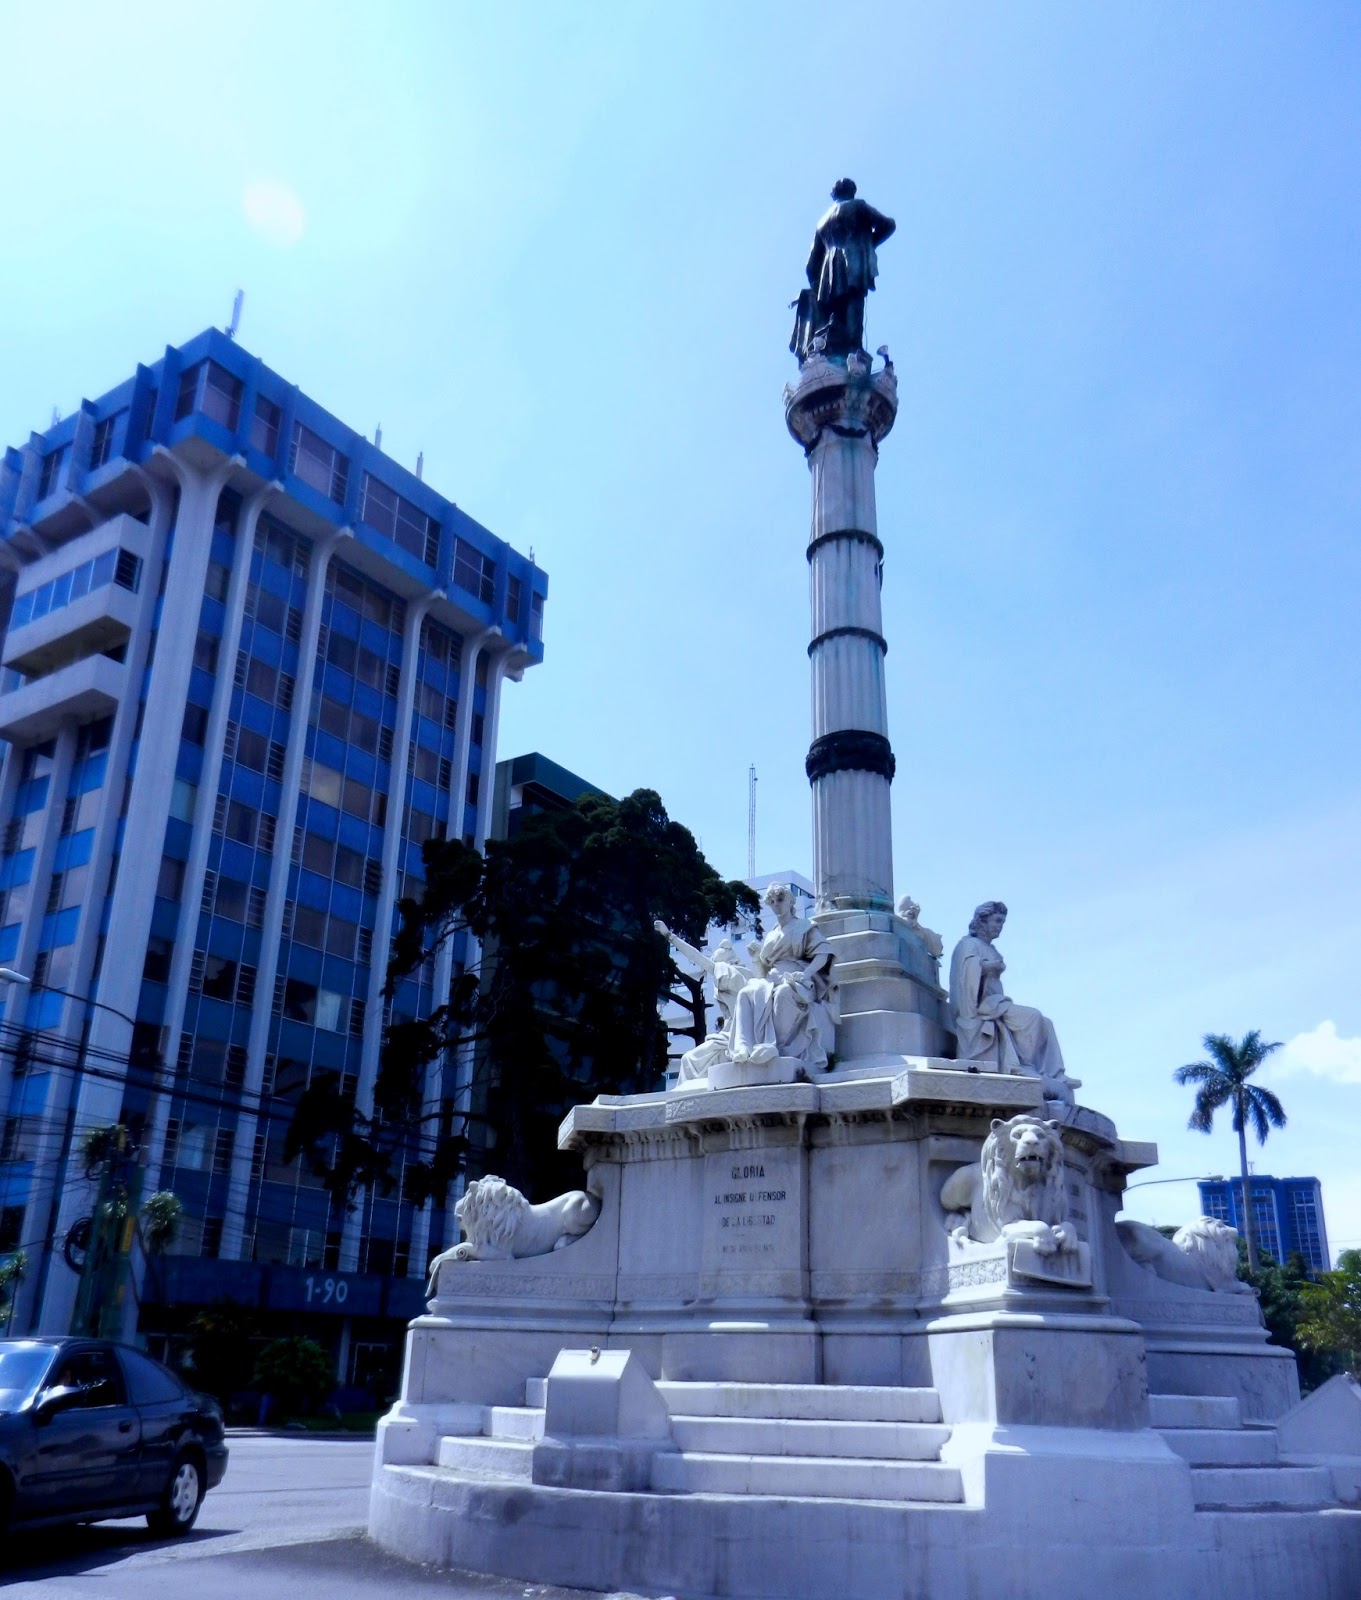 Awesome Guatemala -: Historical places and monuments in Guatemala City